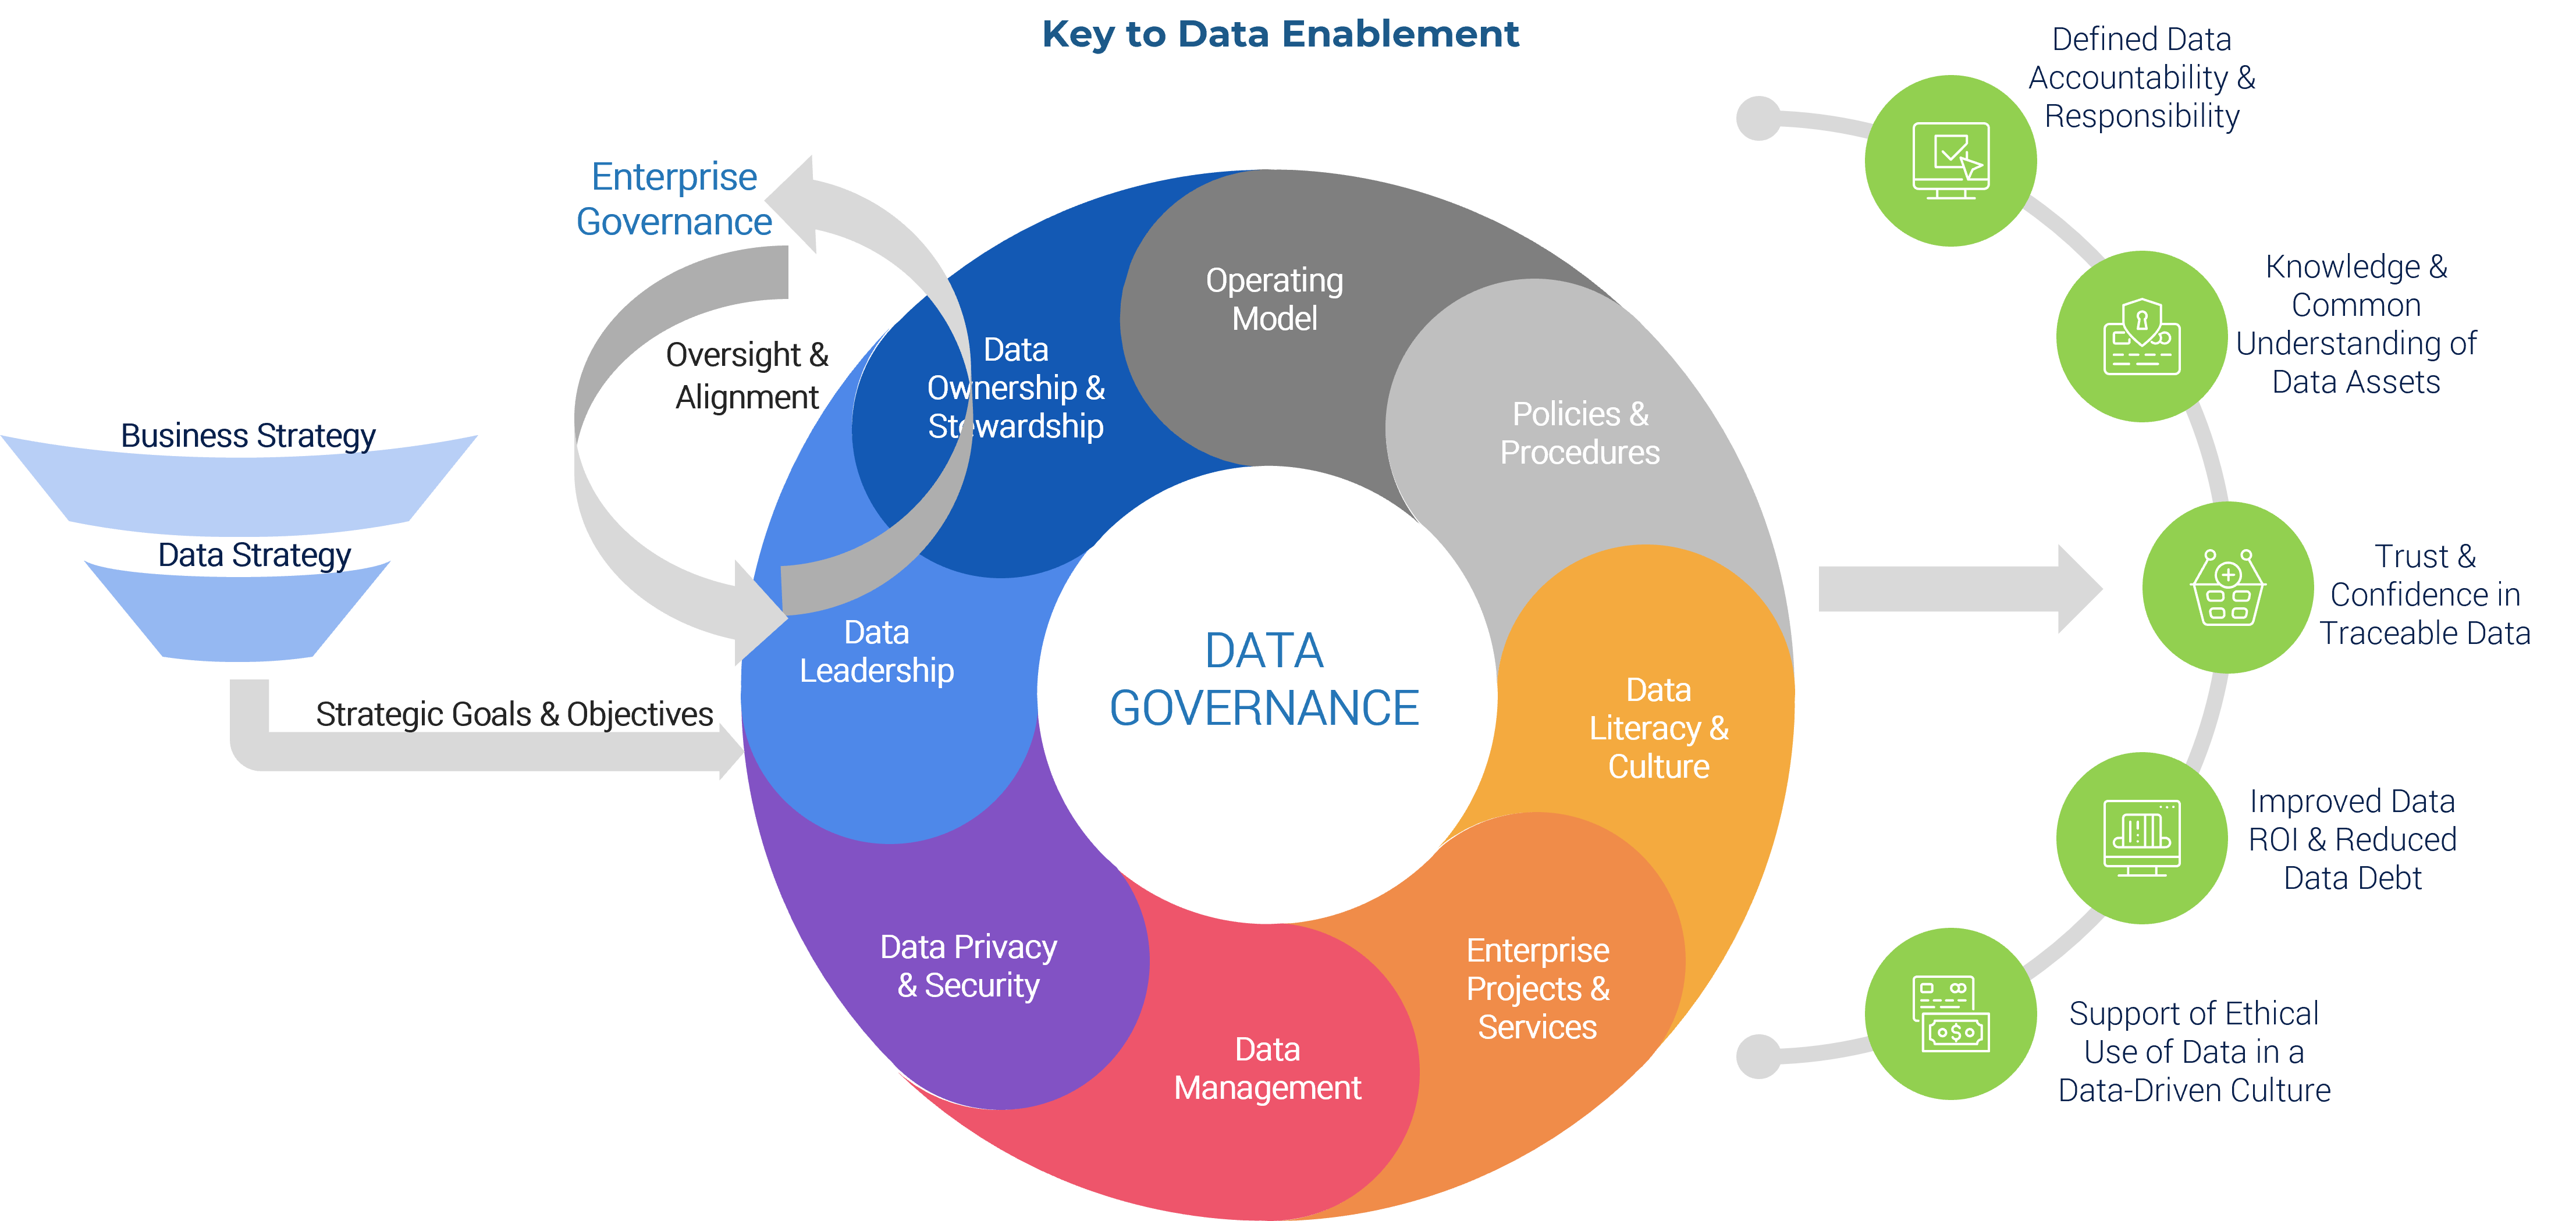 Model of Info-Tech's Data Governance Framework titled 'Key to Data Enablement'. There are inputs, a main Data Governance cycle, and a selection of outputs. The inputs are 'Business Strategy' and 'Data Strategy' injected into the cycle via 'Strategic Goals & Objectives'. The cycle consists of 'Operating Model', 'Policies & Procedures', 'Data Literacy & Culture', 'Enterprise Projects & Services', 'Data Management', 'Data Privacy & Security', 'Data Leadership', and 'Data Ownership & Stewardship'. The latter two are part of 'Enterprise Governance's 'Oversight & Alignment' cycle. Outputs are 'Defined Data Accountability & Responsibility', 'Knowledge & Common Understanding of Data Assets', 'Trust & Confidence in Traceable Data', 'Improved Data ROI & Reduced Data Debt', and 'Support of Ethical Use of Data in a Data-Driven Culture'.